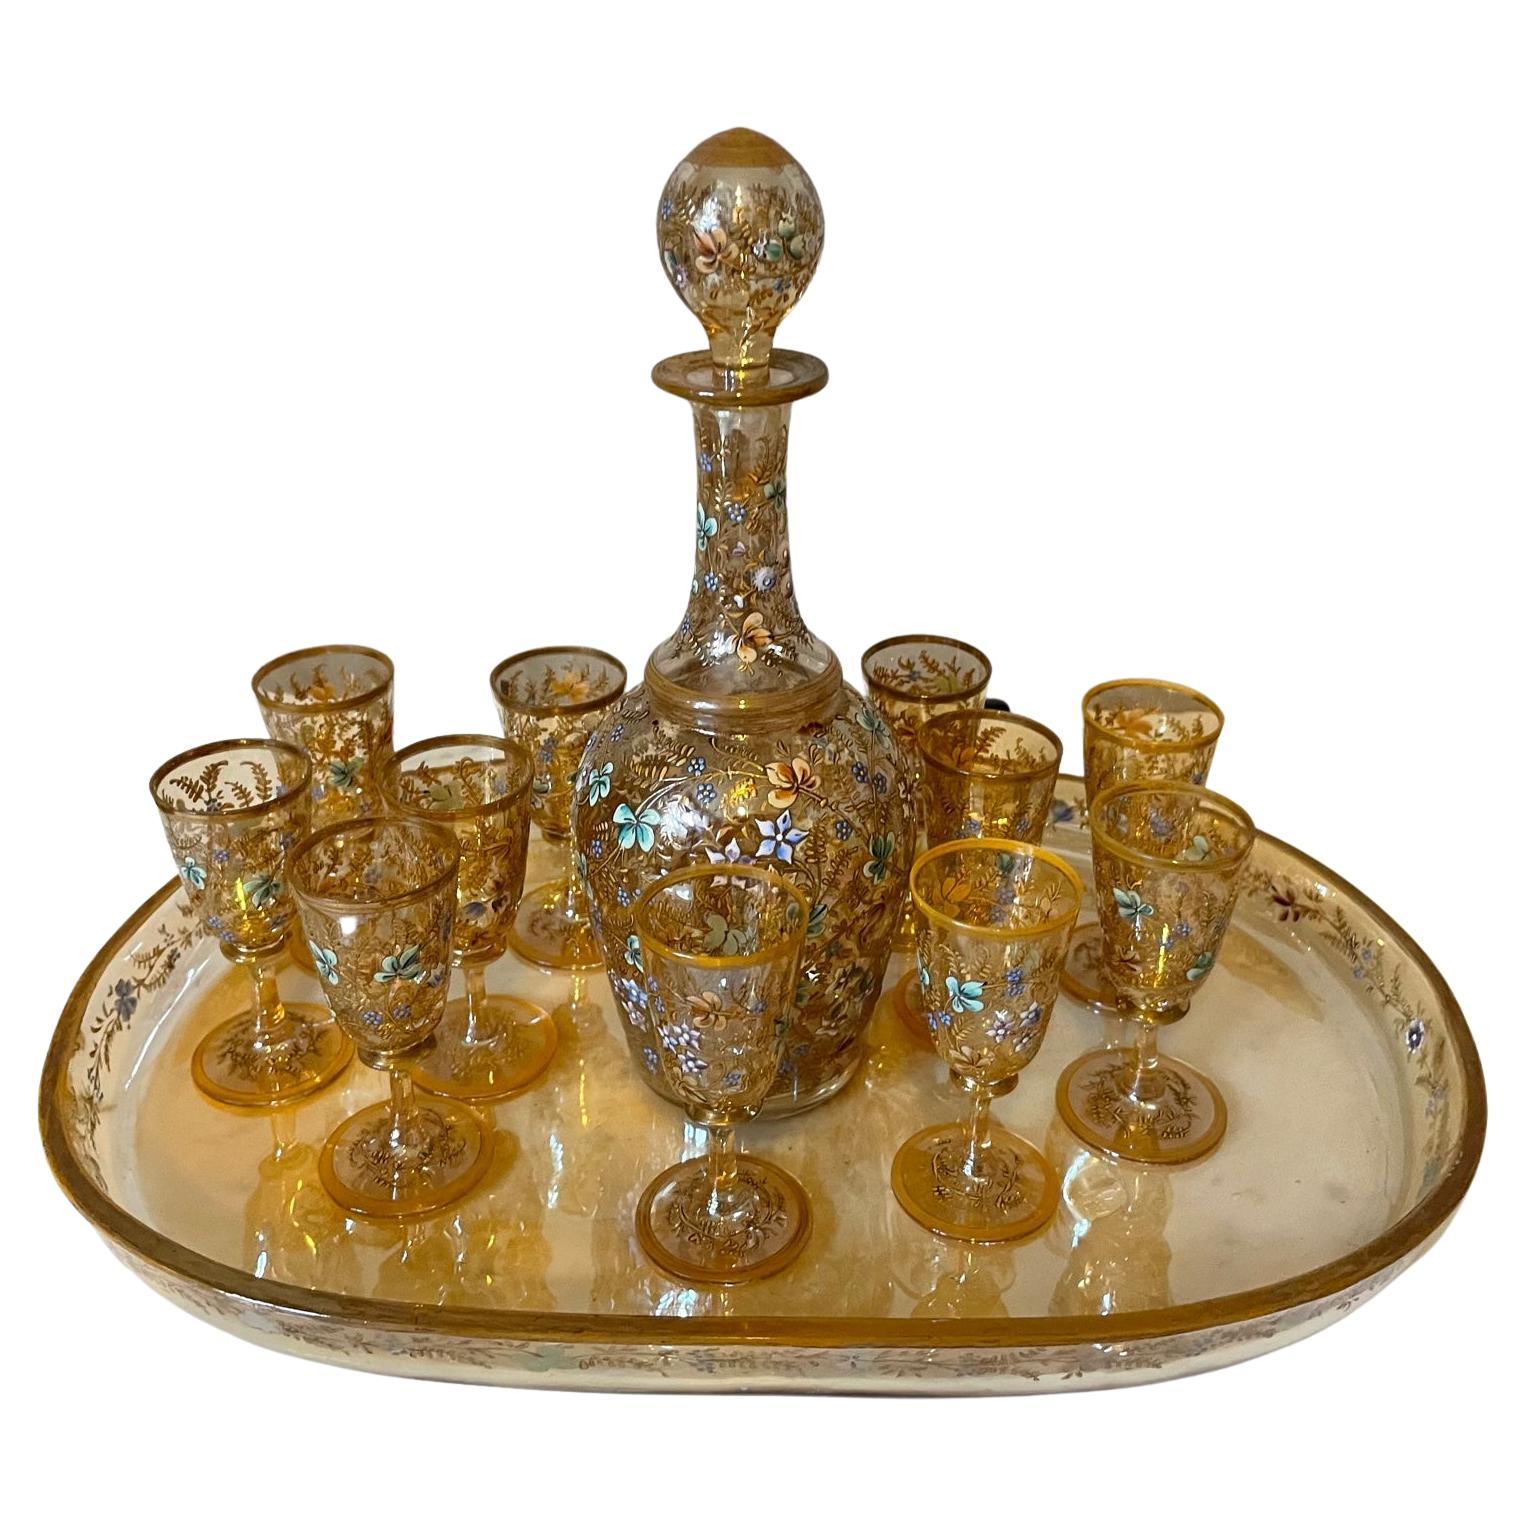 20th Century French Enameled Glass Liquor Service with Tray, 1900s